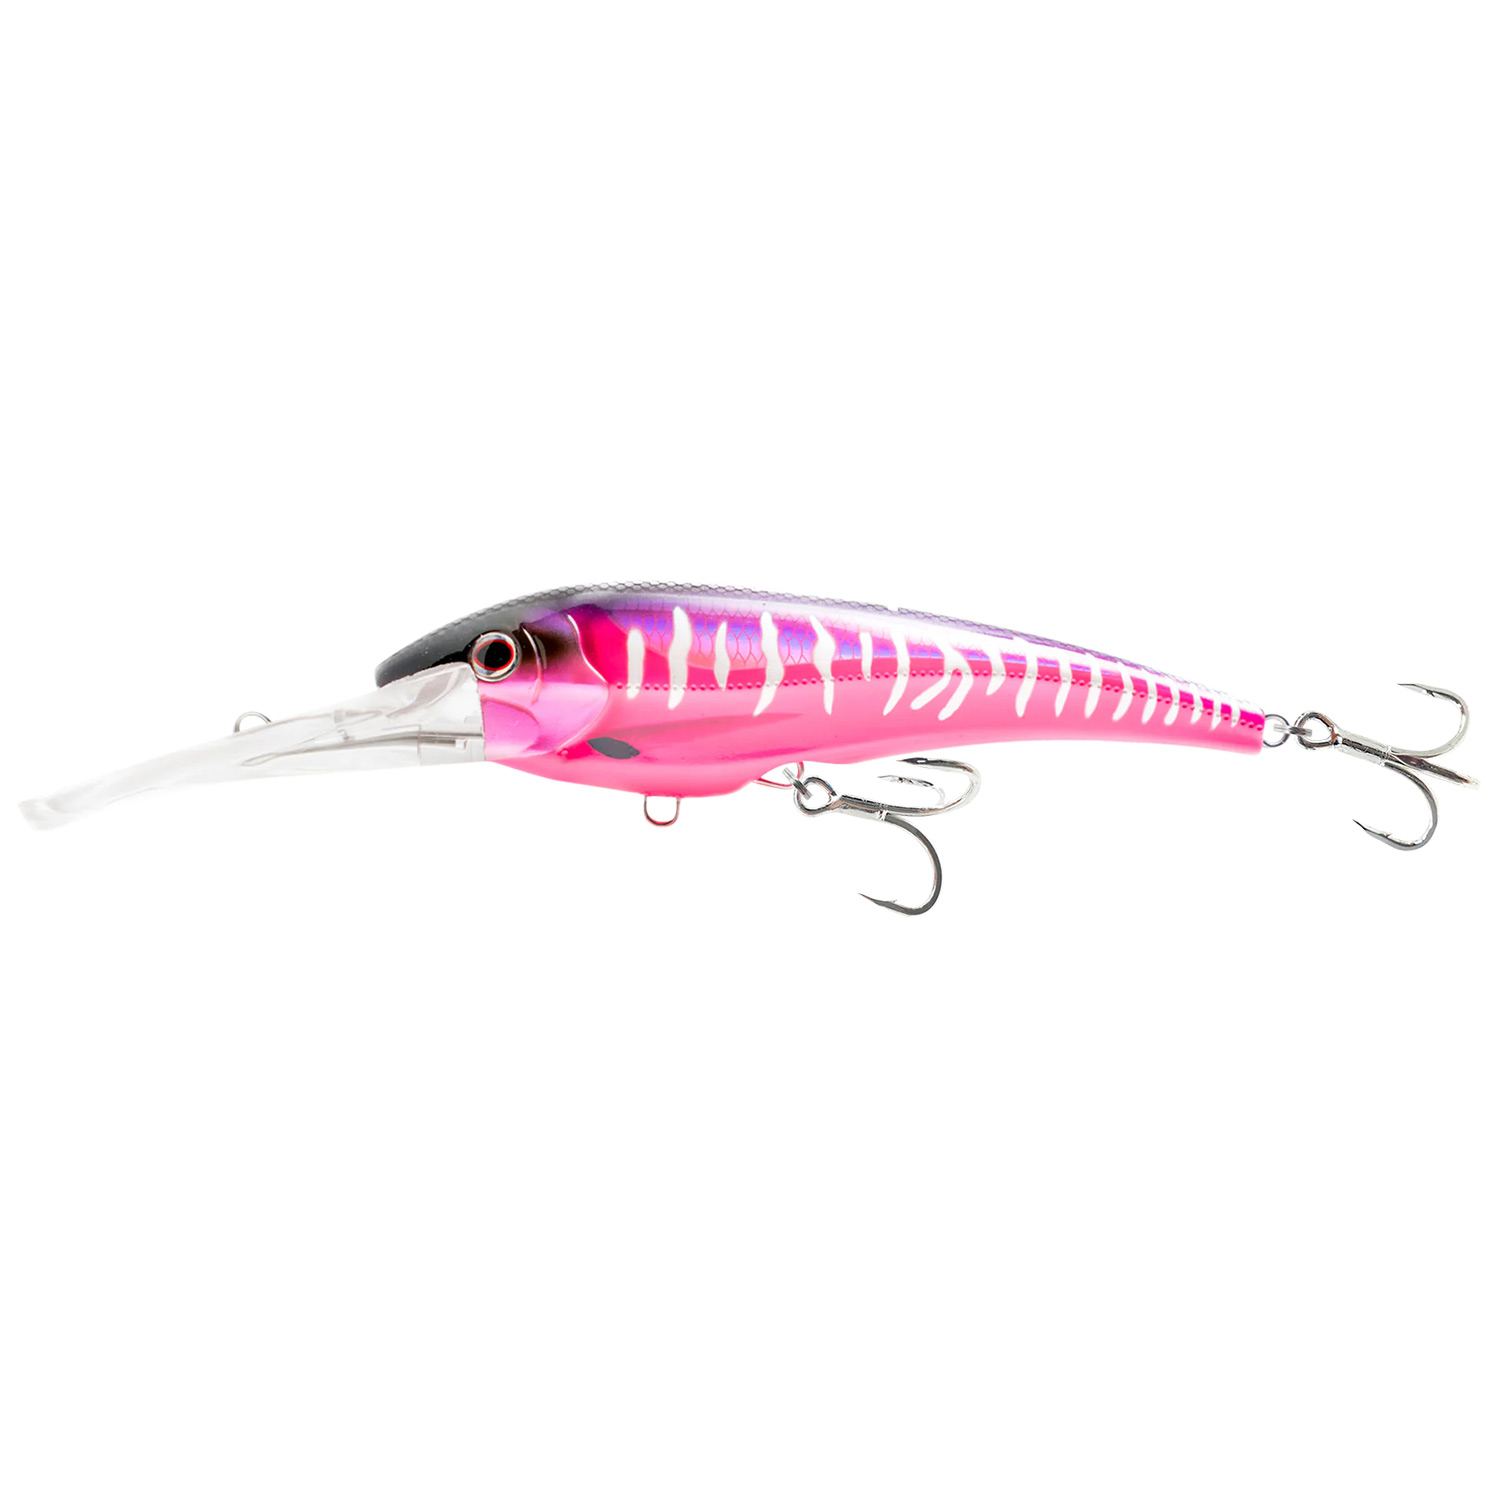 NOMAD DESIGN 5 1/2 DTX Minnow Floating Trolling Lure, 1 3/4 Ounces